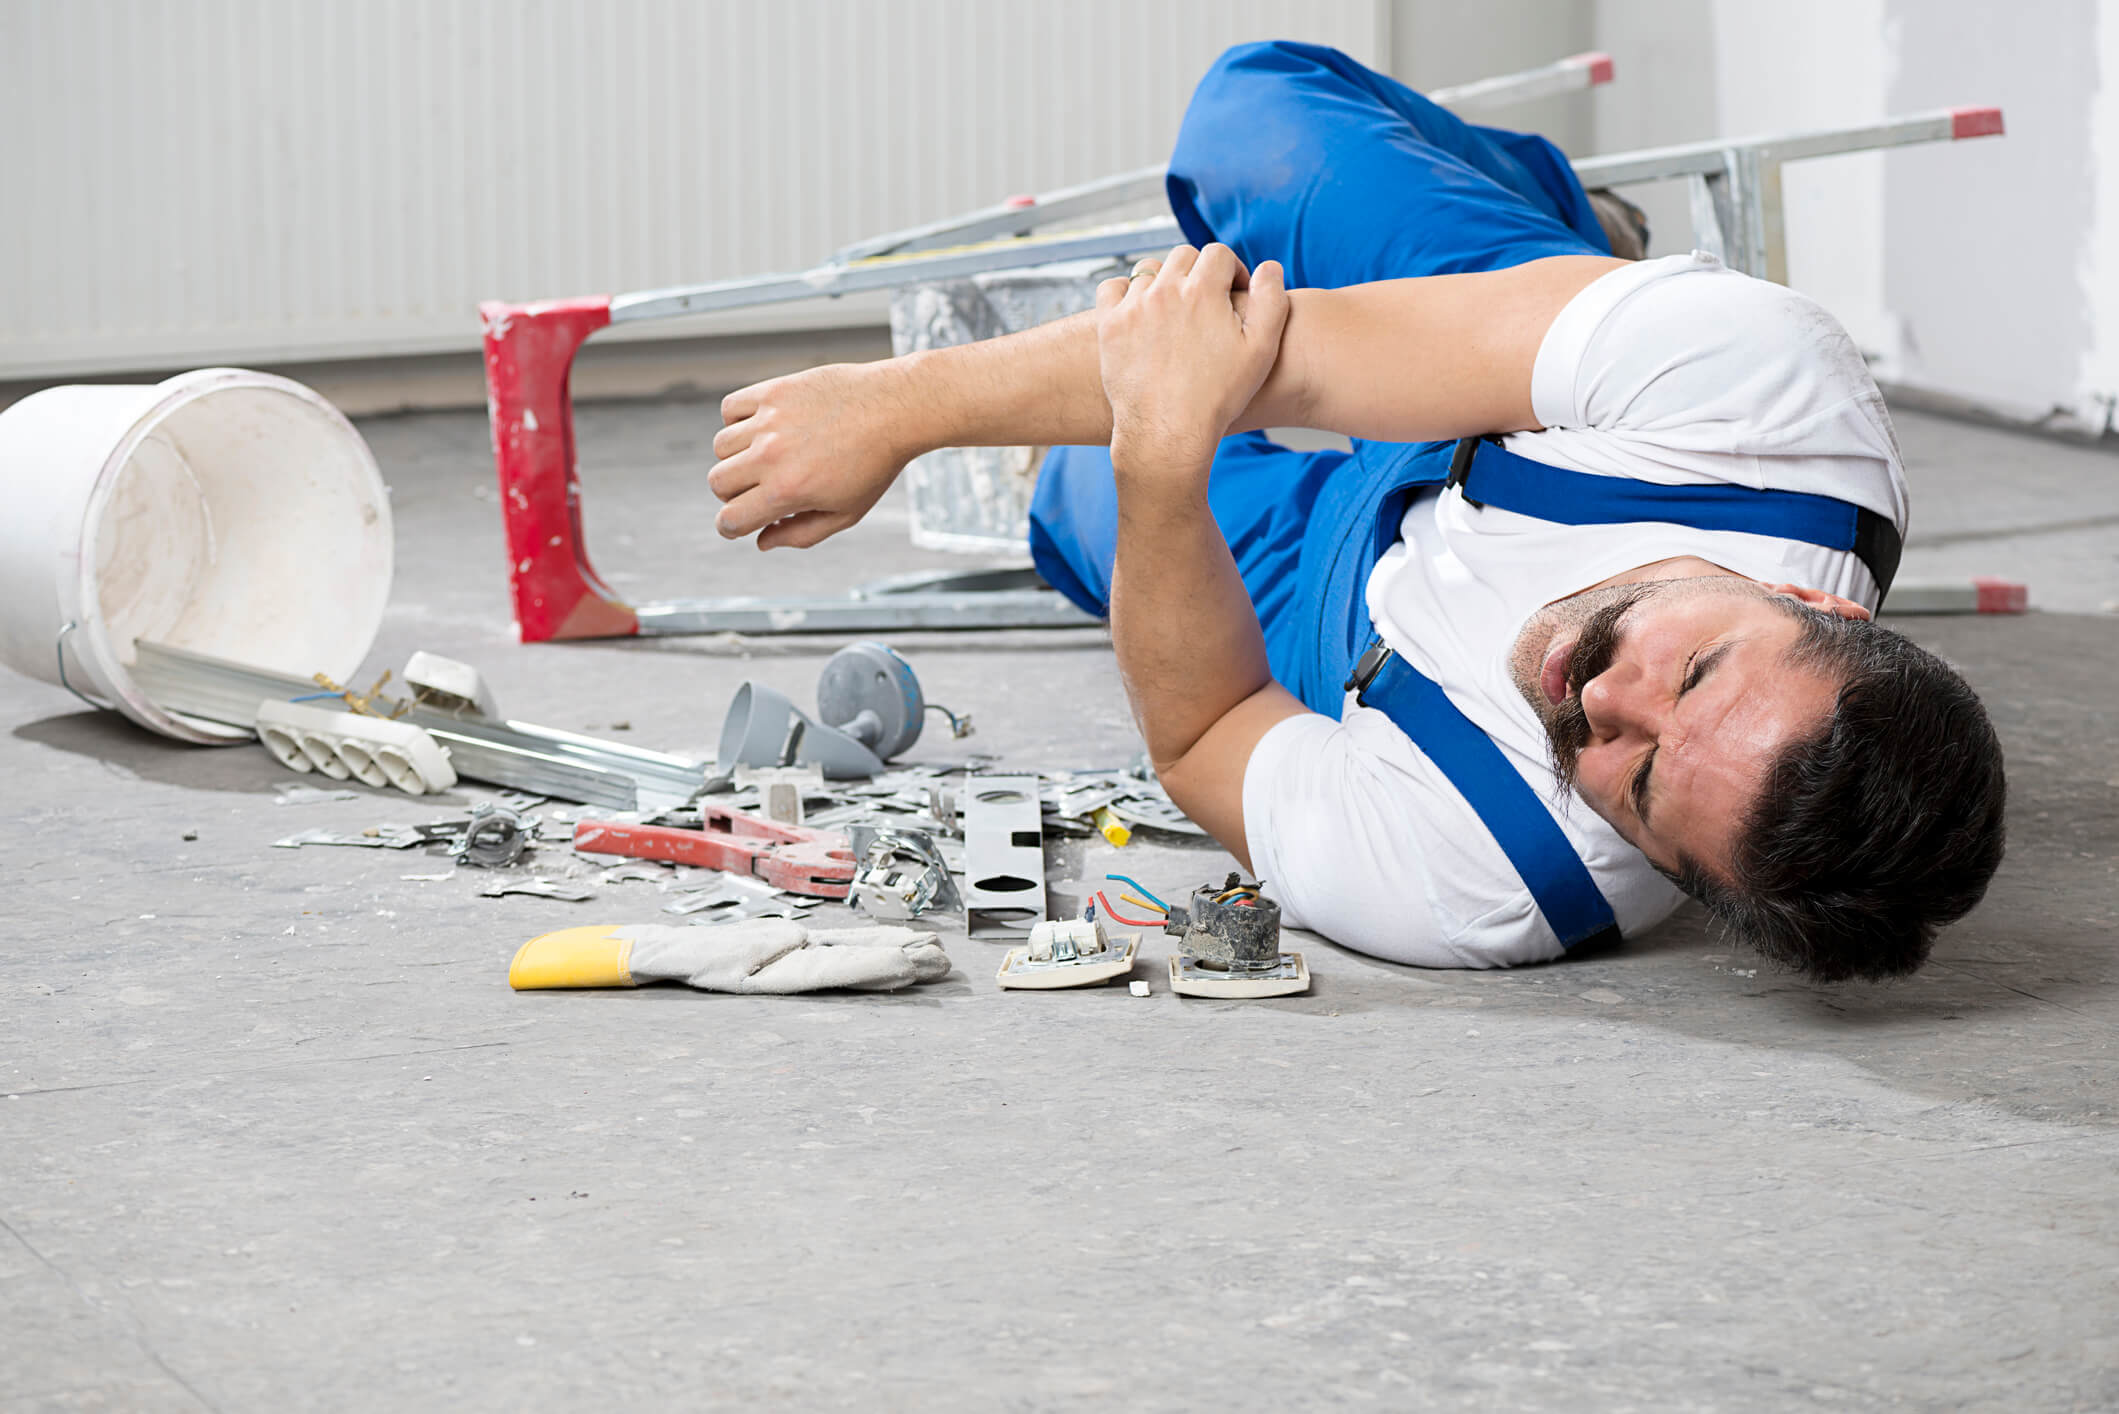 Industrial Accidents in the Workplace: What You Should Know